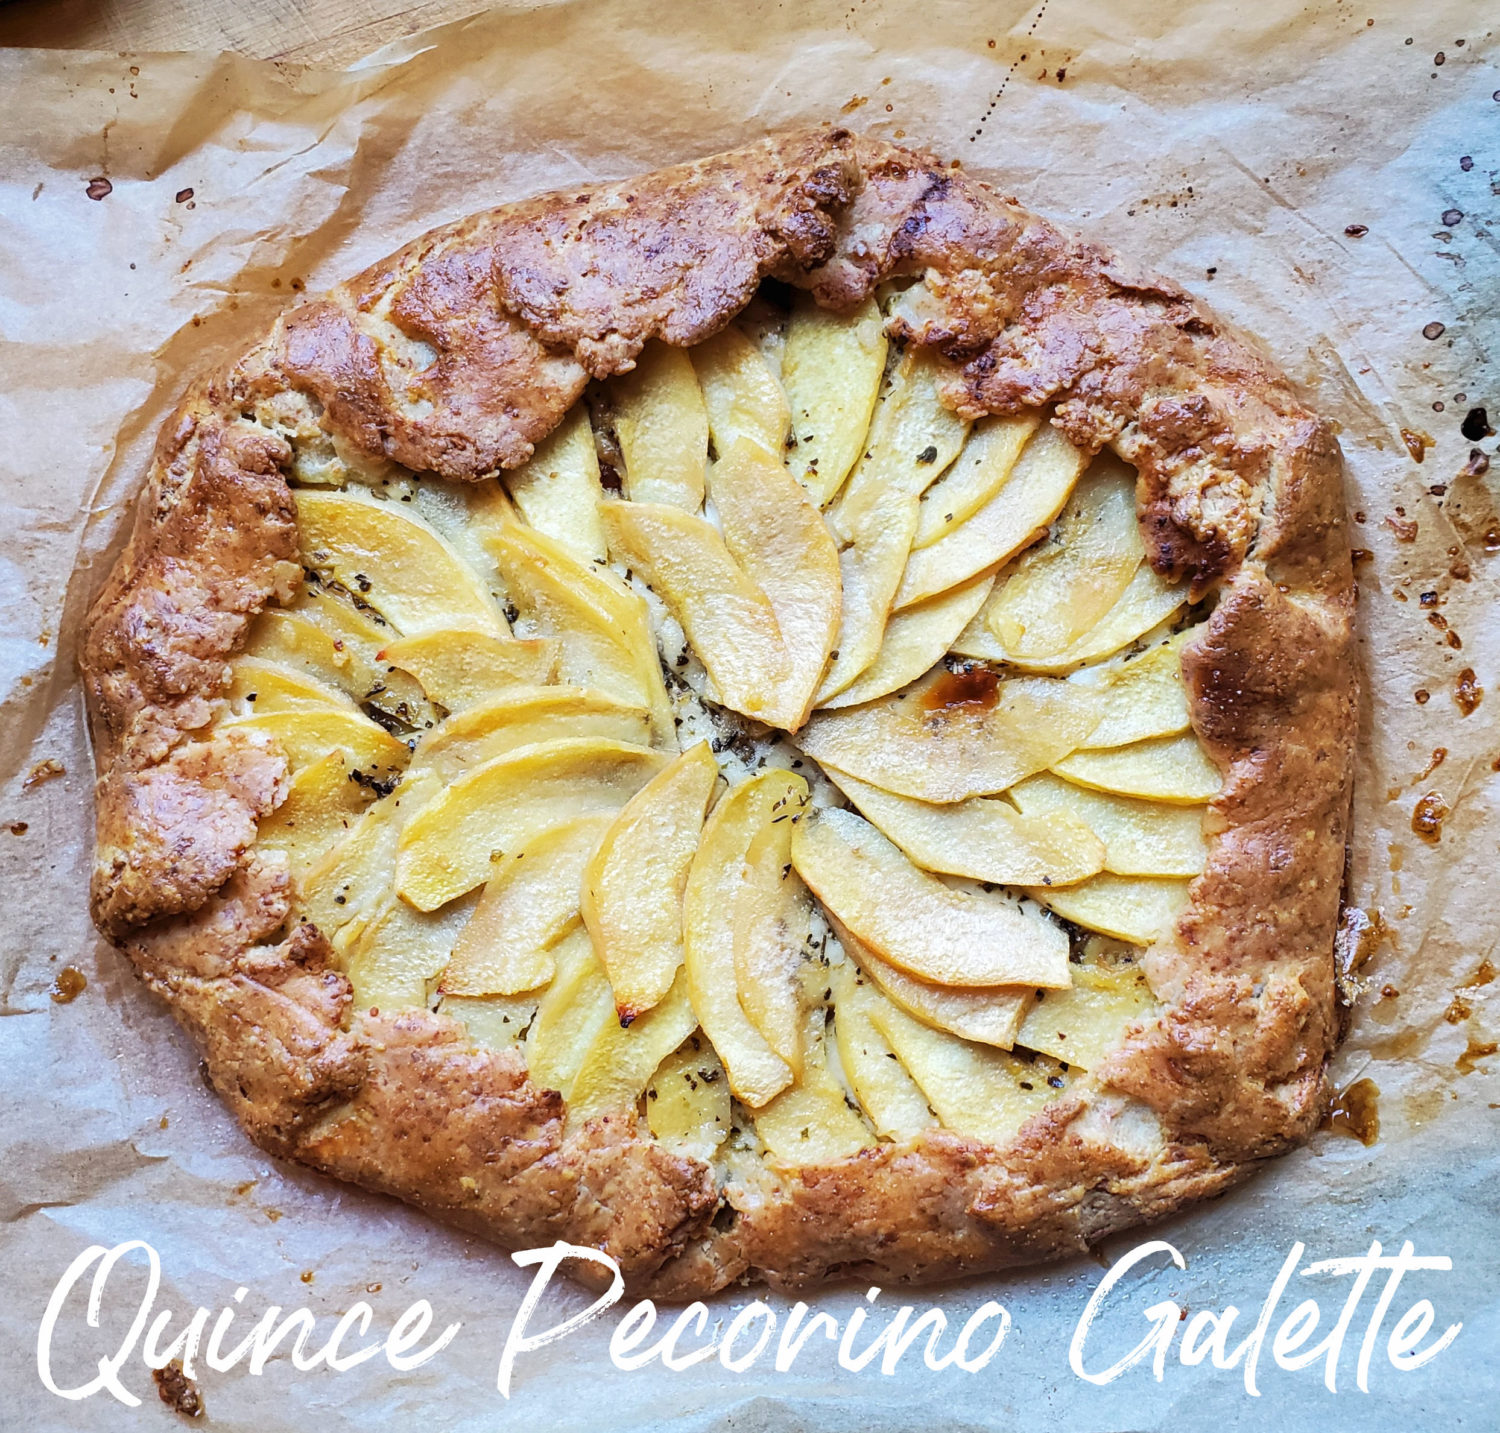 Quince Pecorino & Parmesan Galette; perfect balance of savory and hint of sweetness with caramelized onions for the most perfect brunch pie.